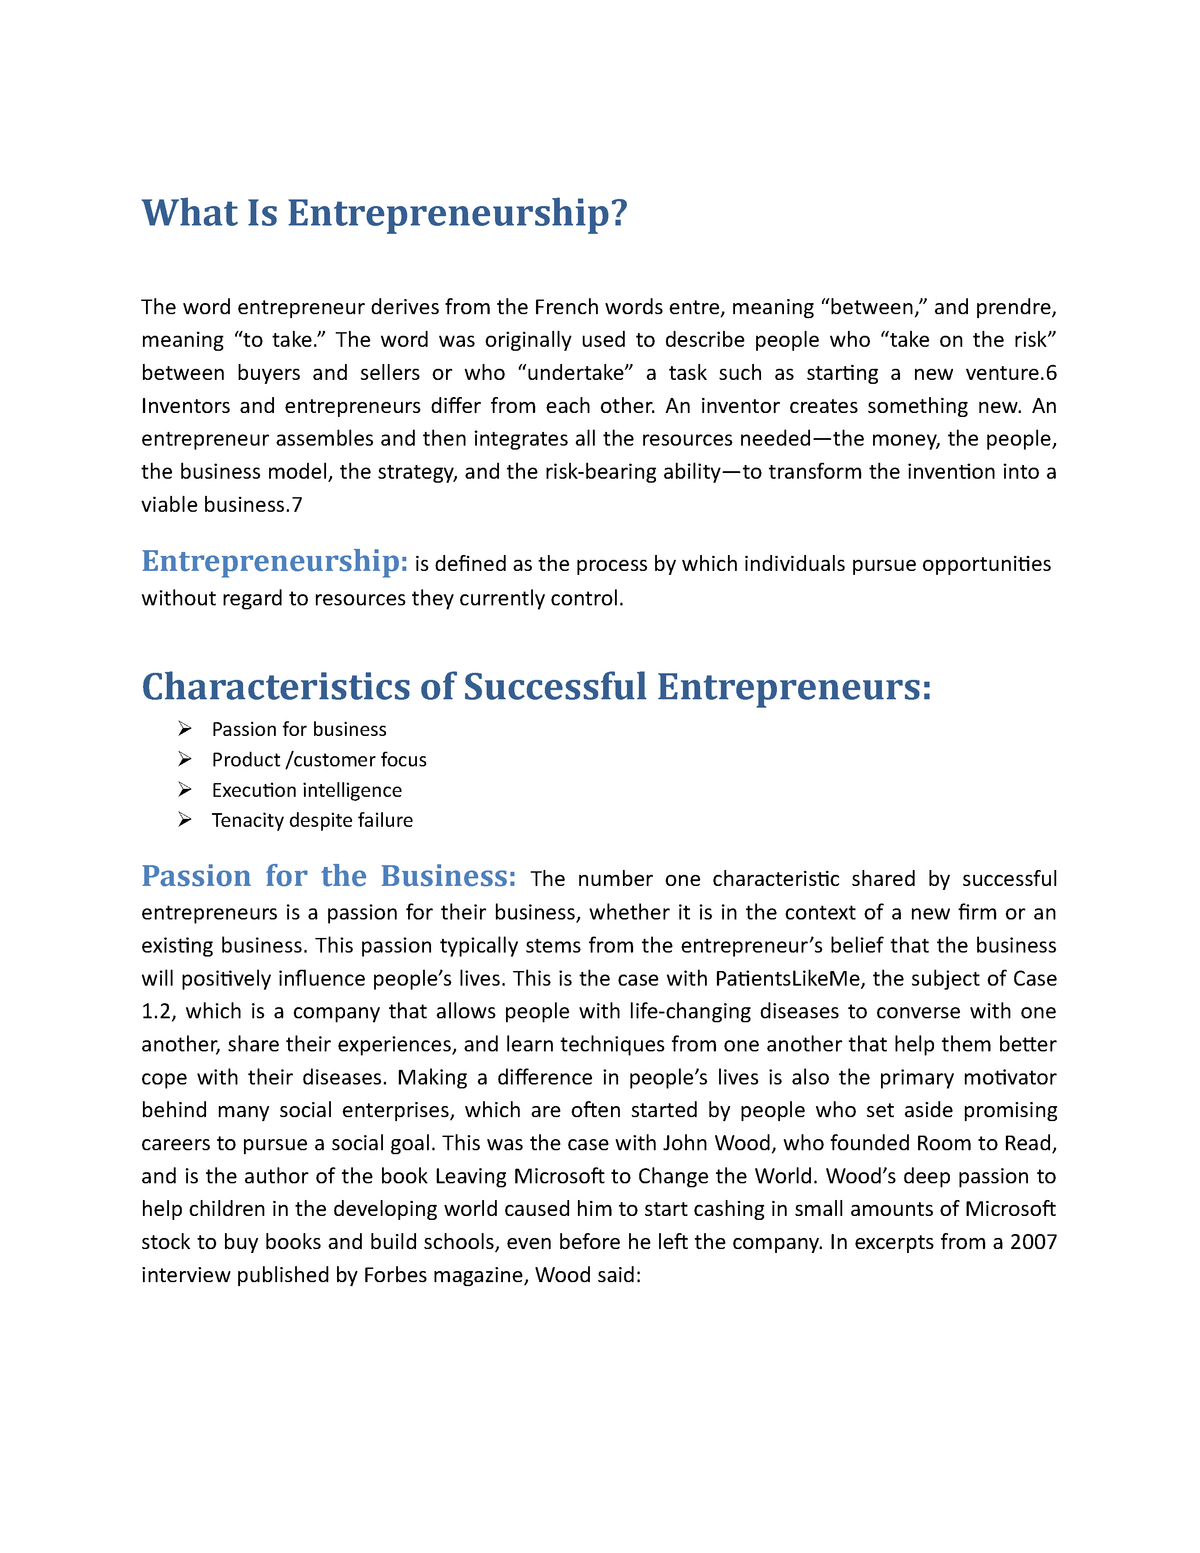 what is entrepreneurship in your own words essay